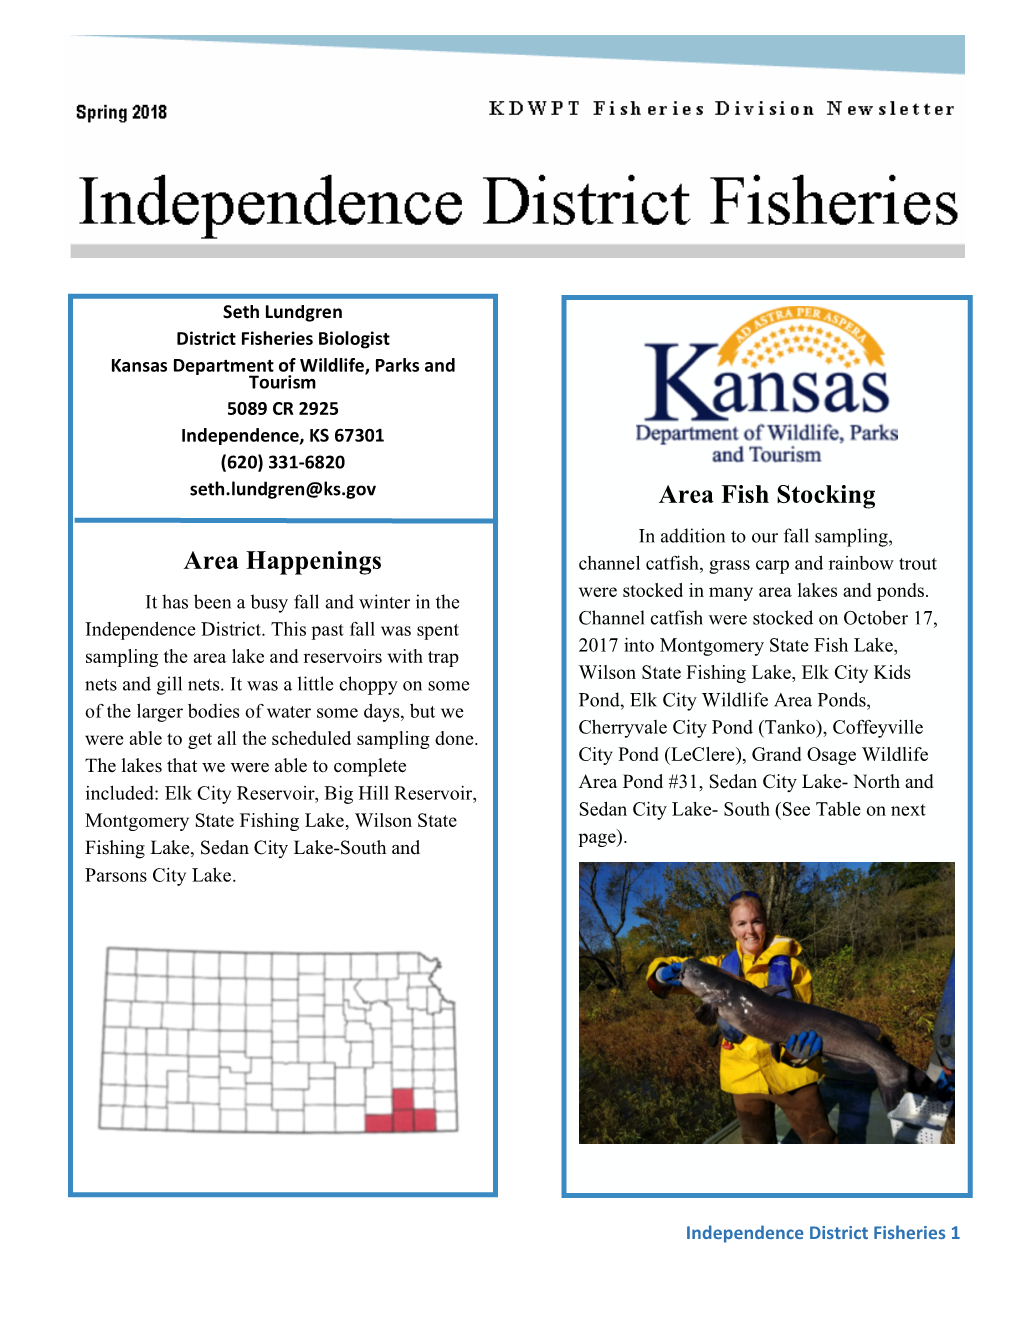 Independence District Fisheries Newsletter 4-16-2018